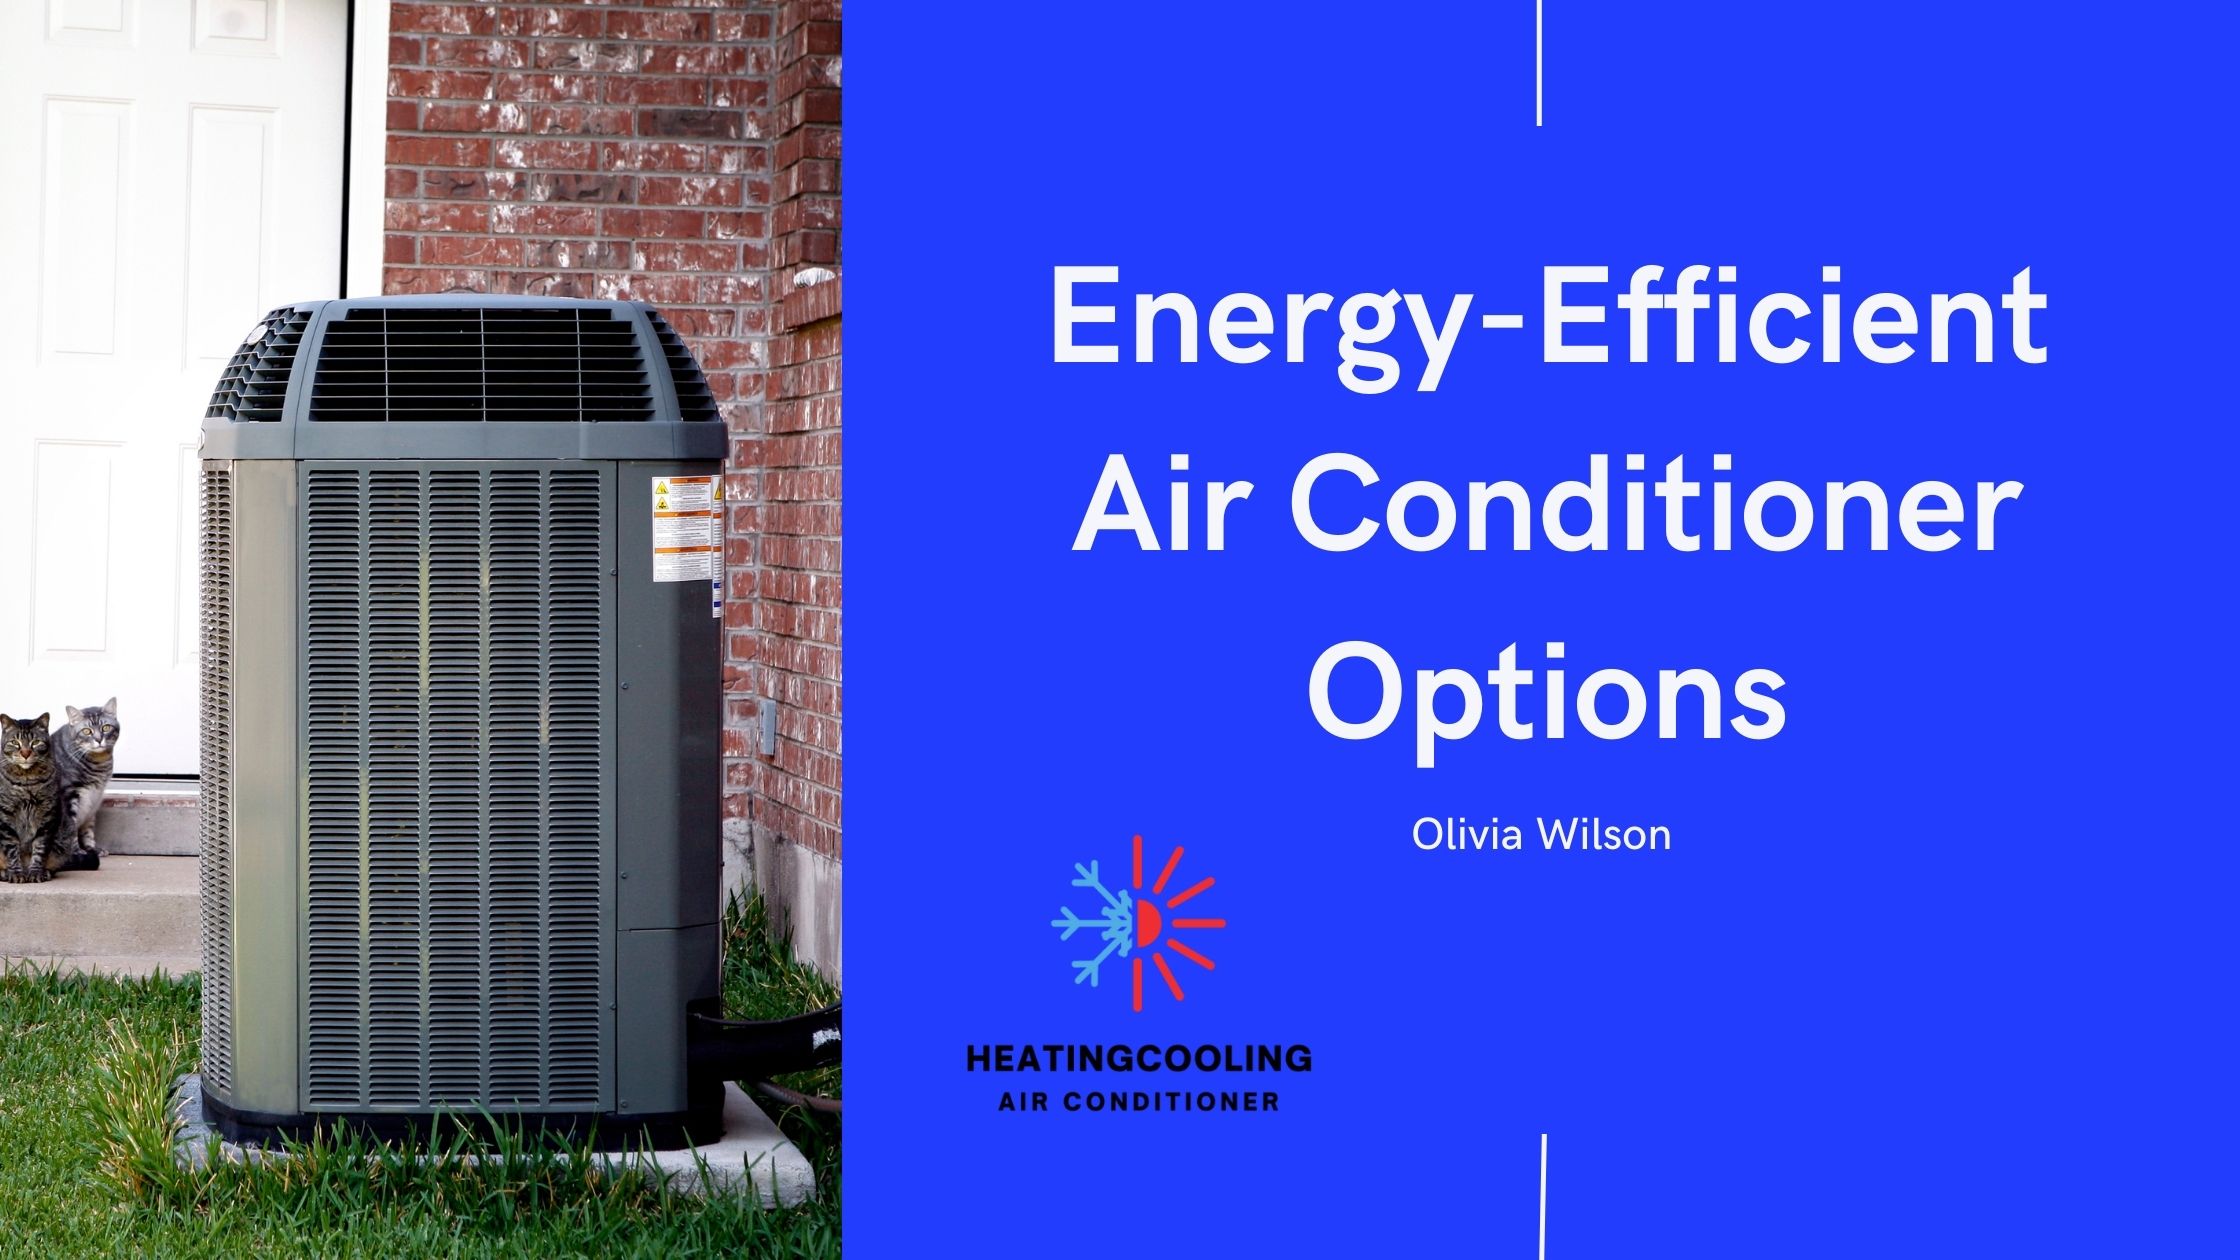 What Are The Most Energy-Efficient Air Conditioner Options?